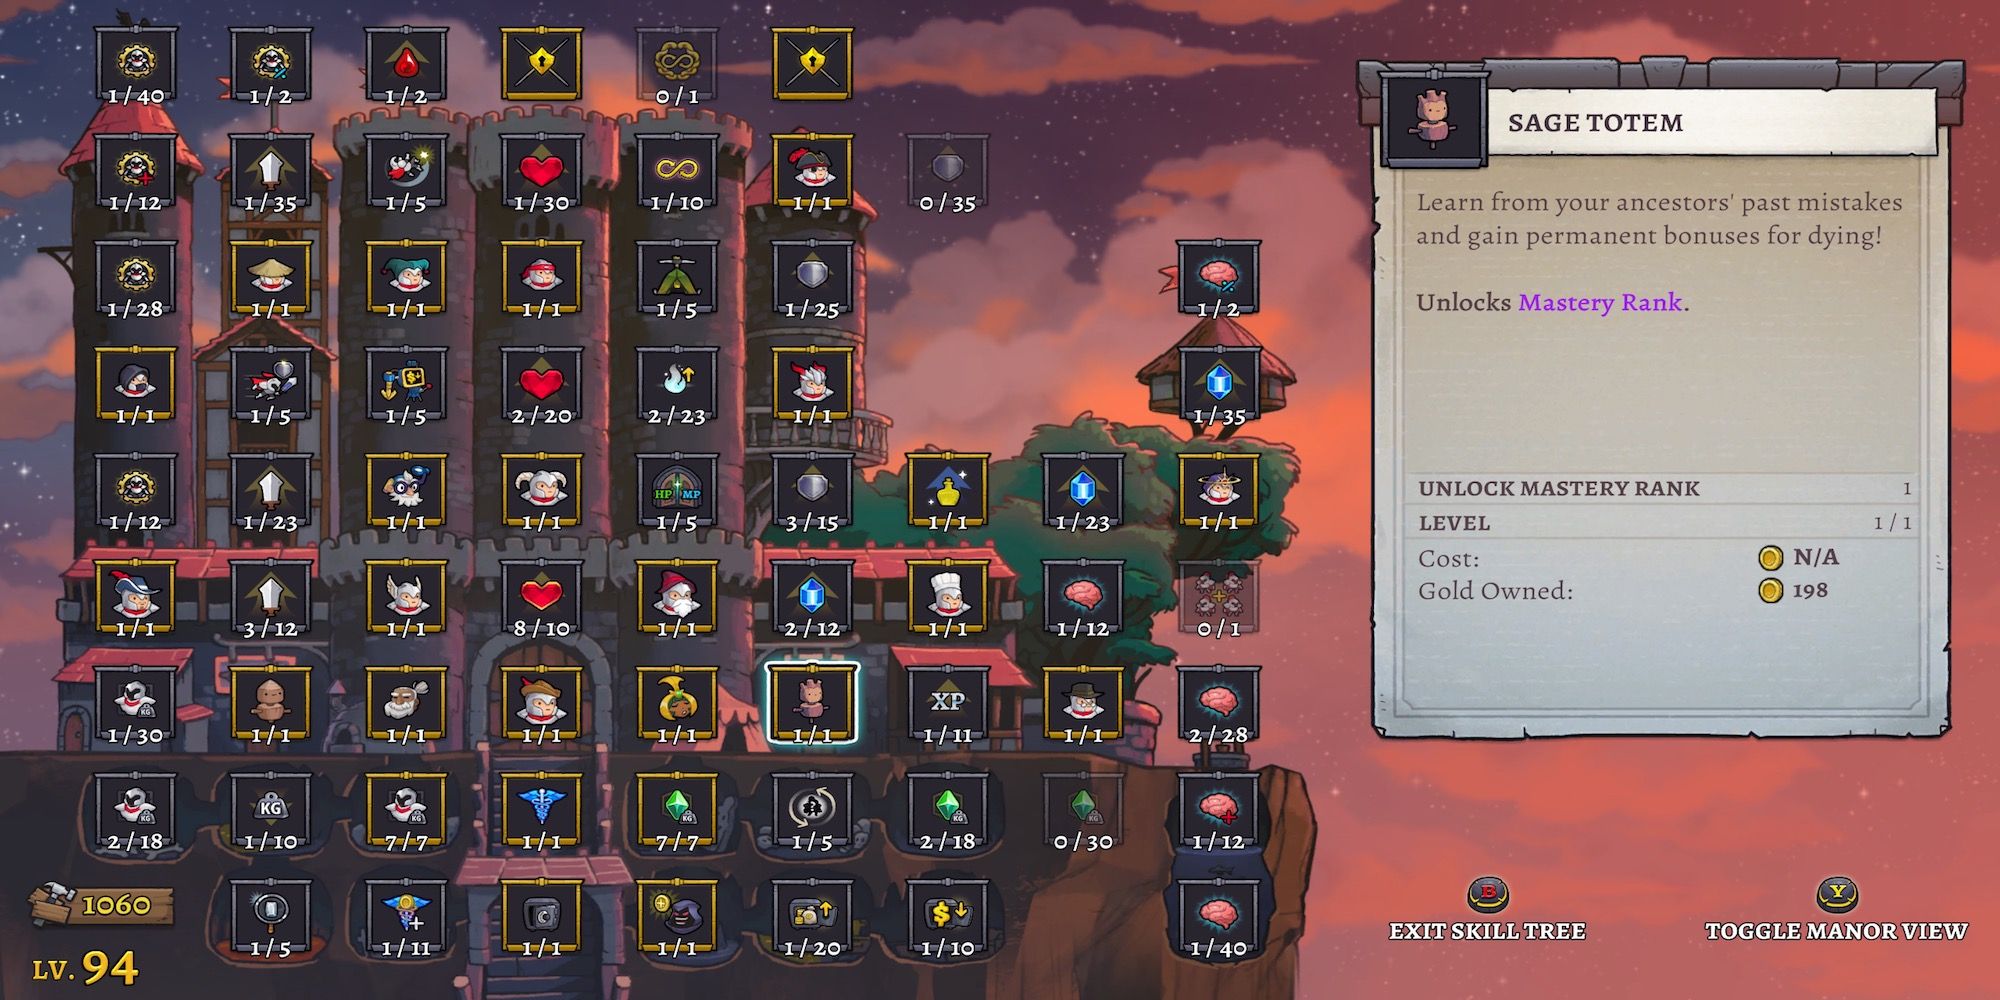 The Sage Totem castle upgrade in Rogue Legacy 2